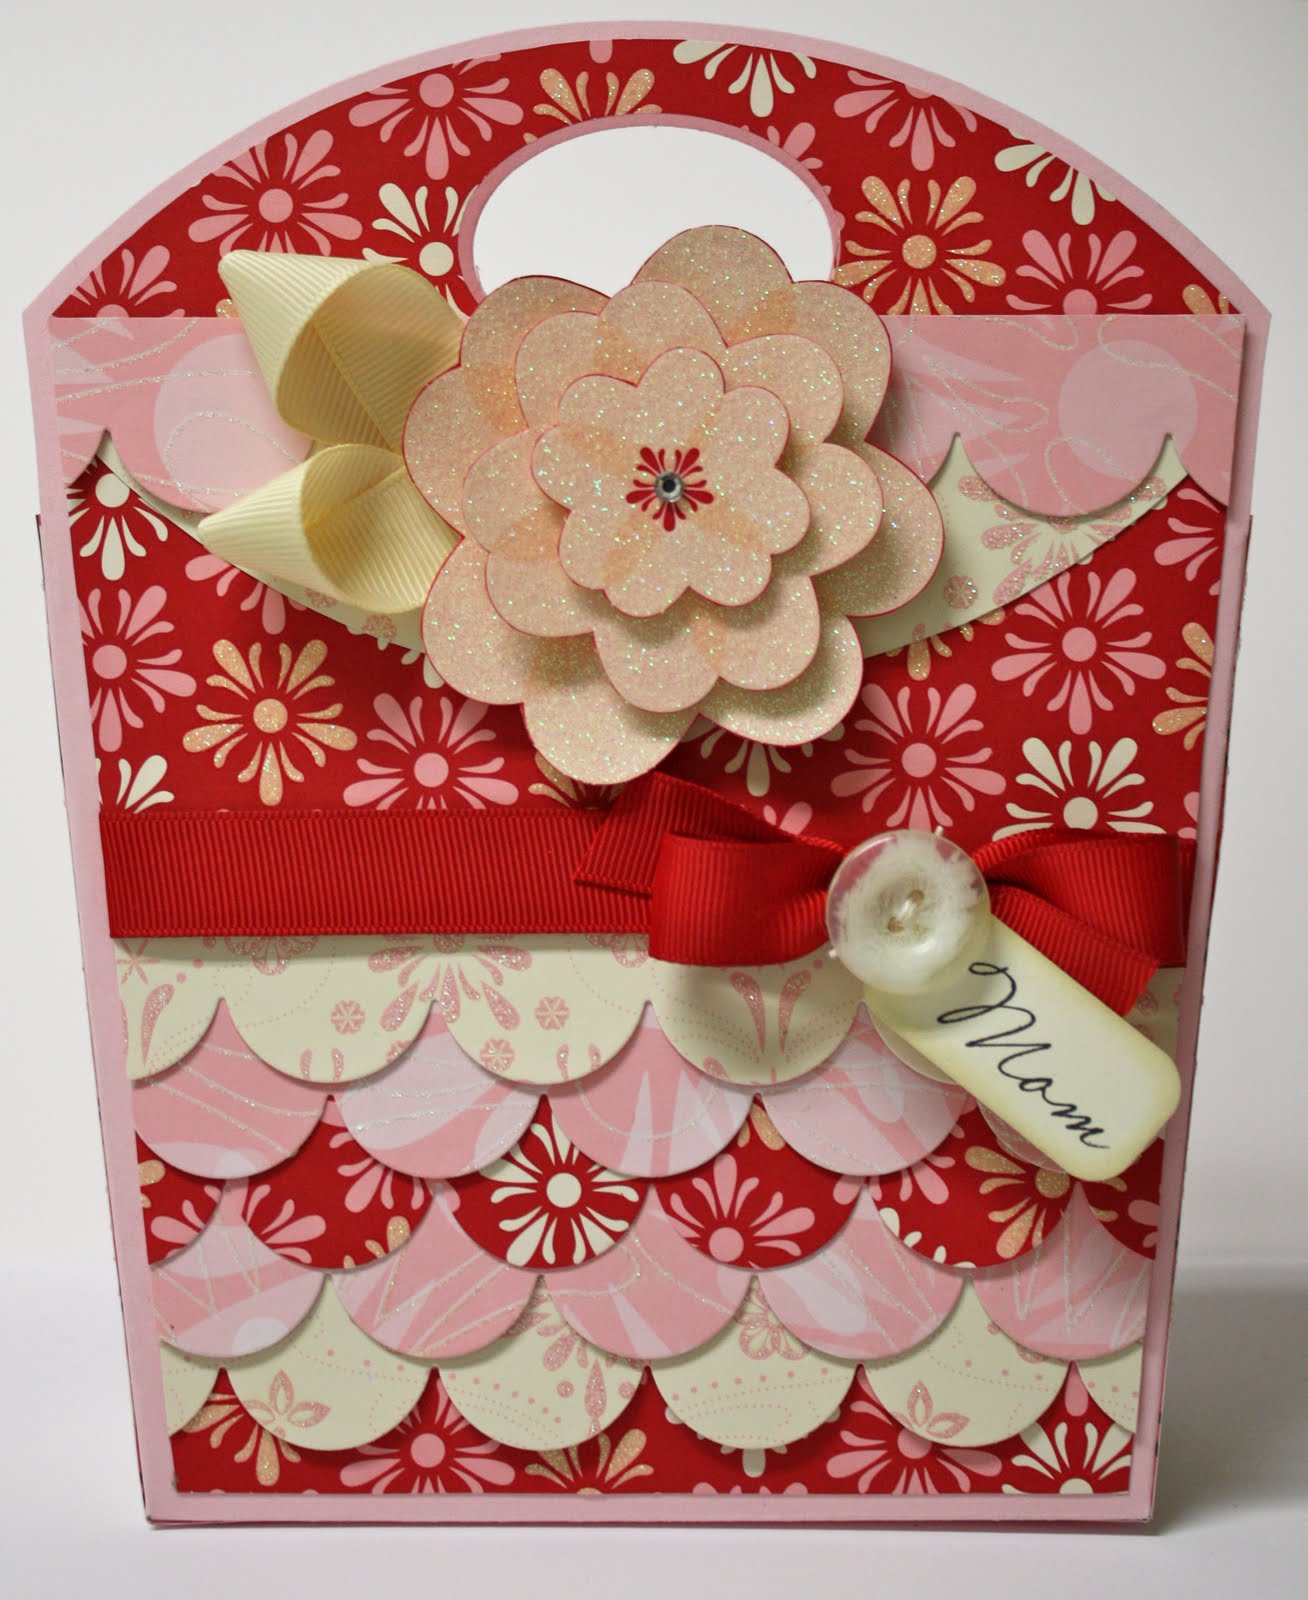 Sassy Stampin': Give a {glittery} Gift